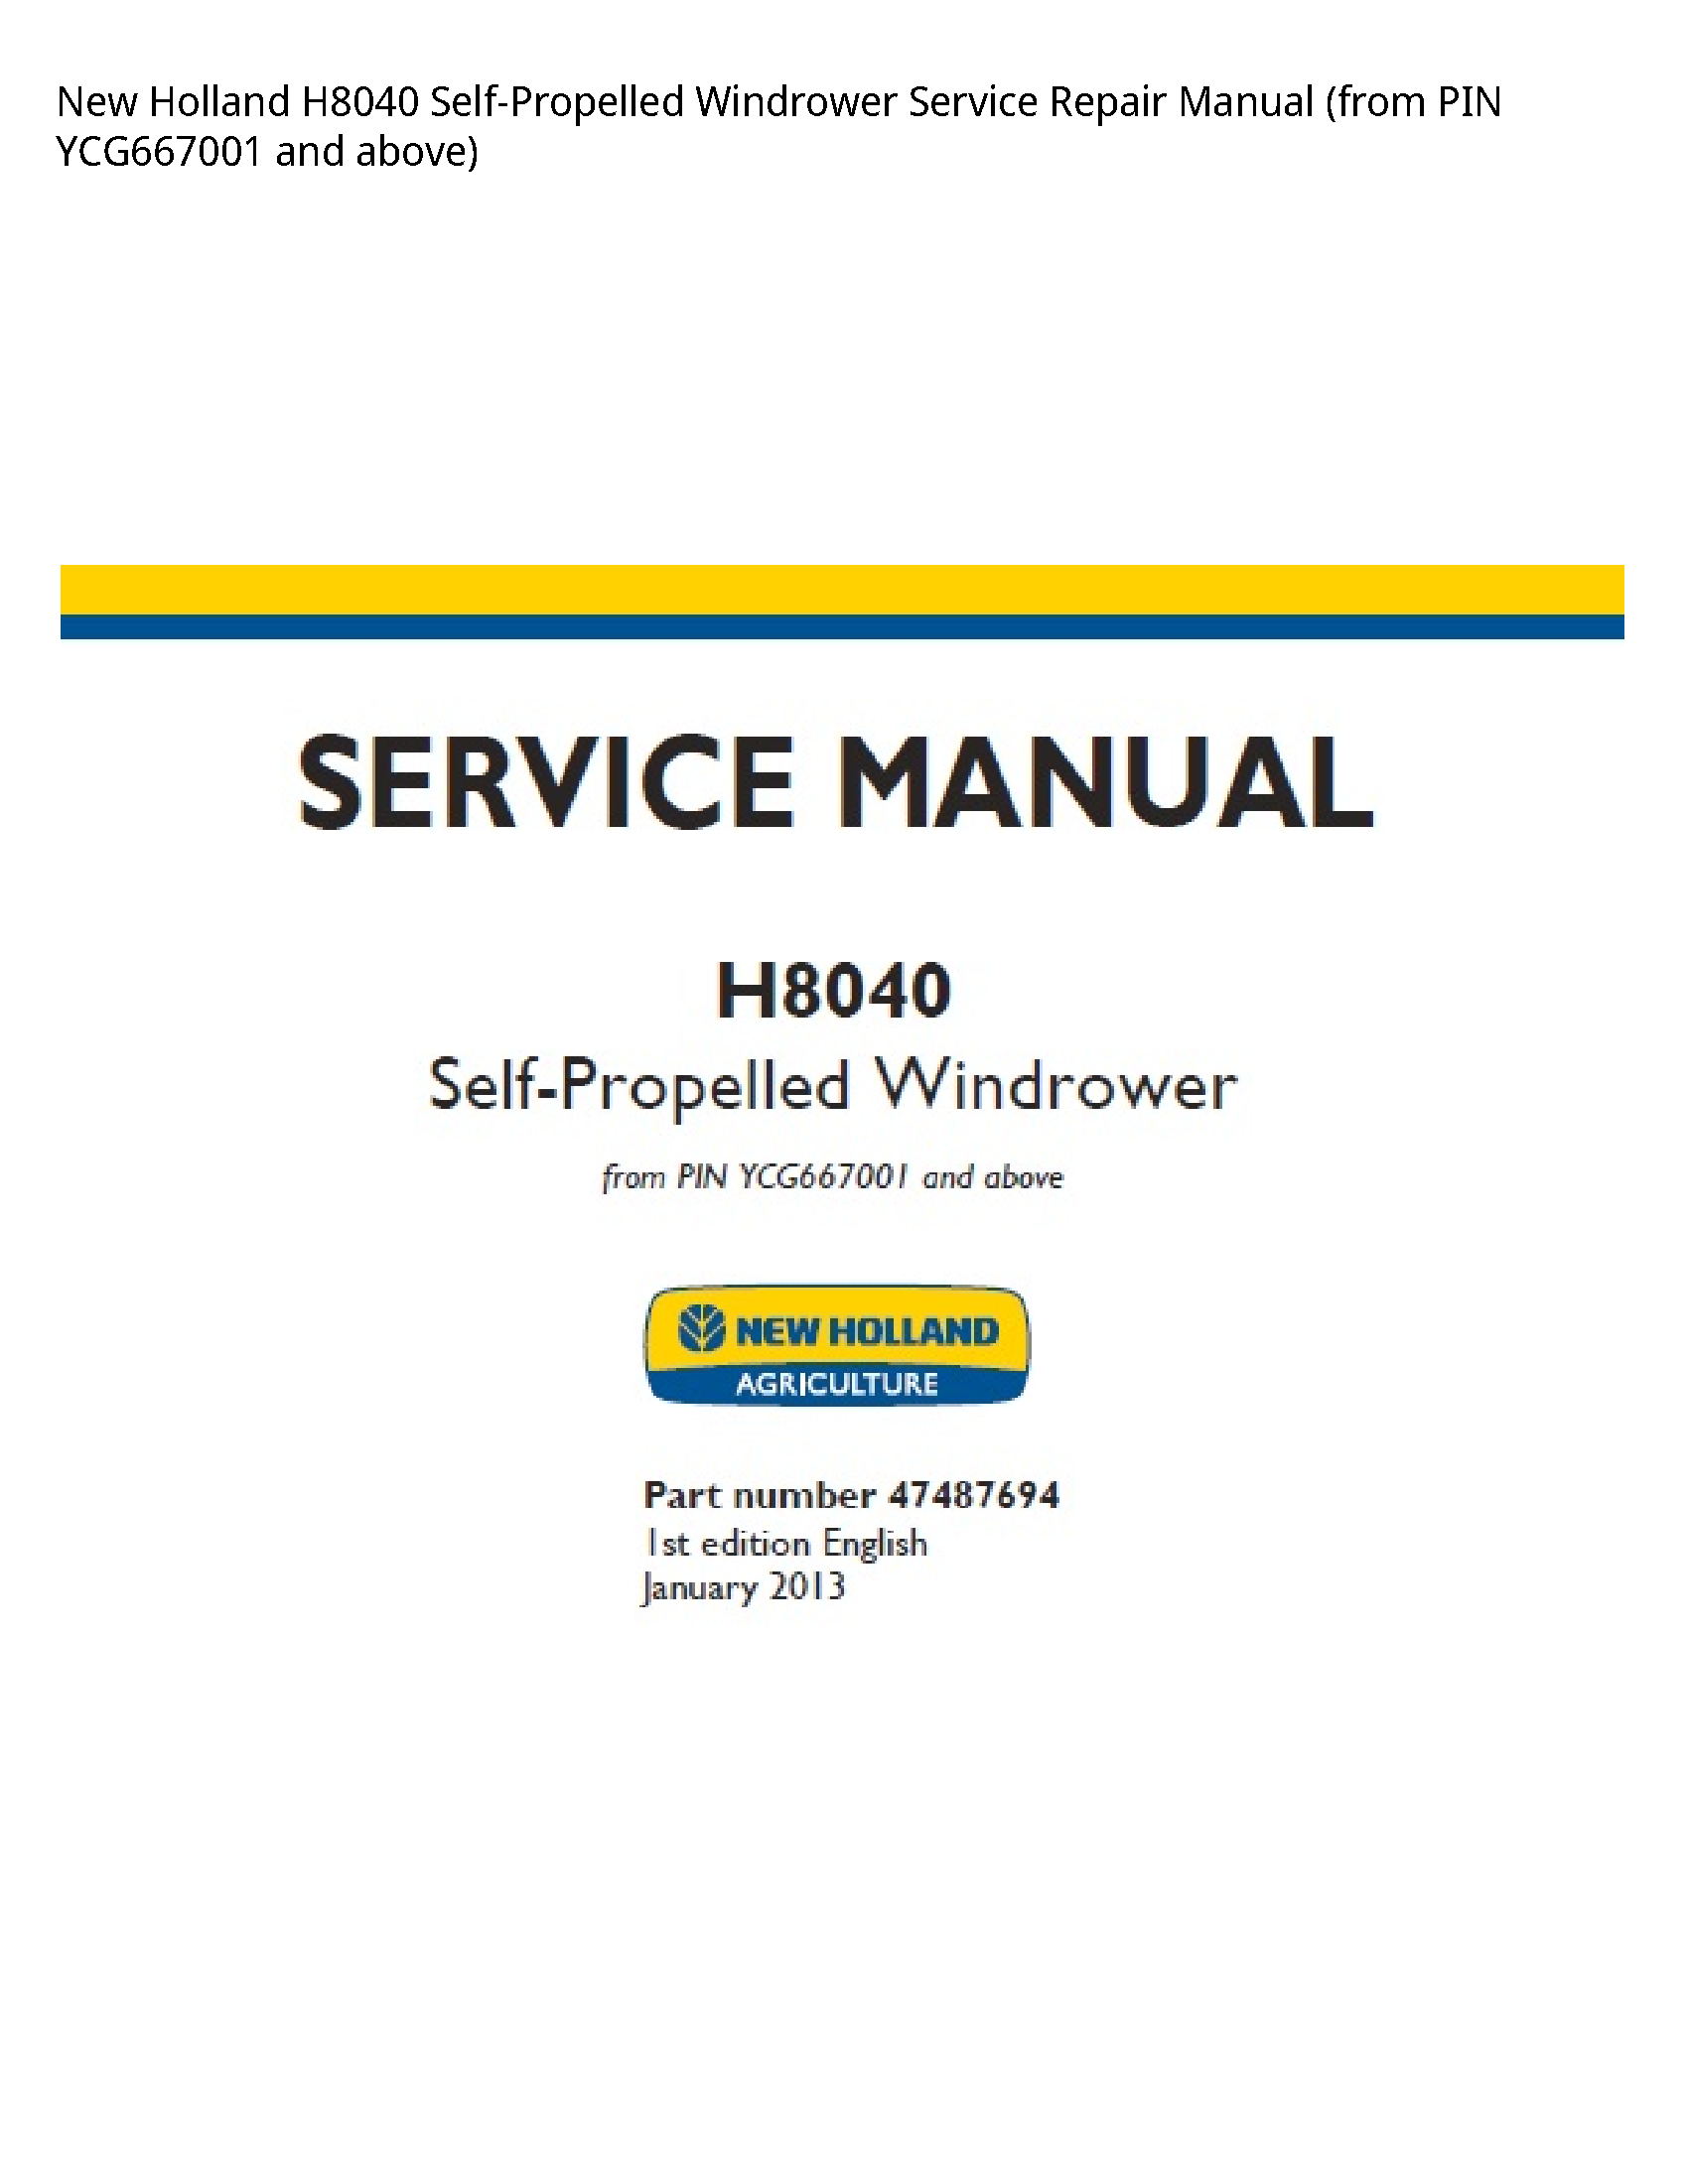 New Holland H8040 Self-Propelled Windrower manual